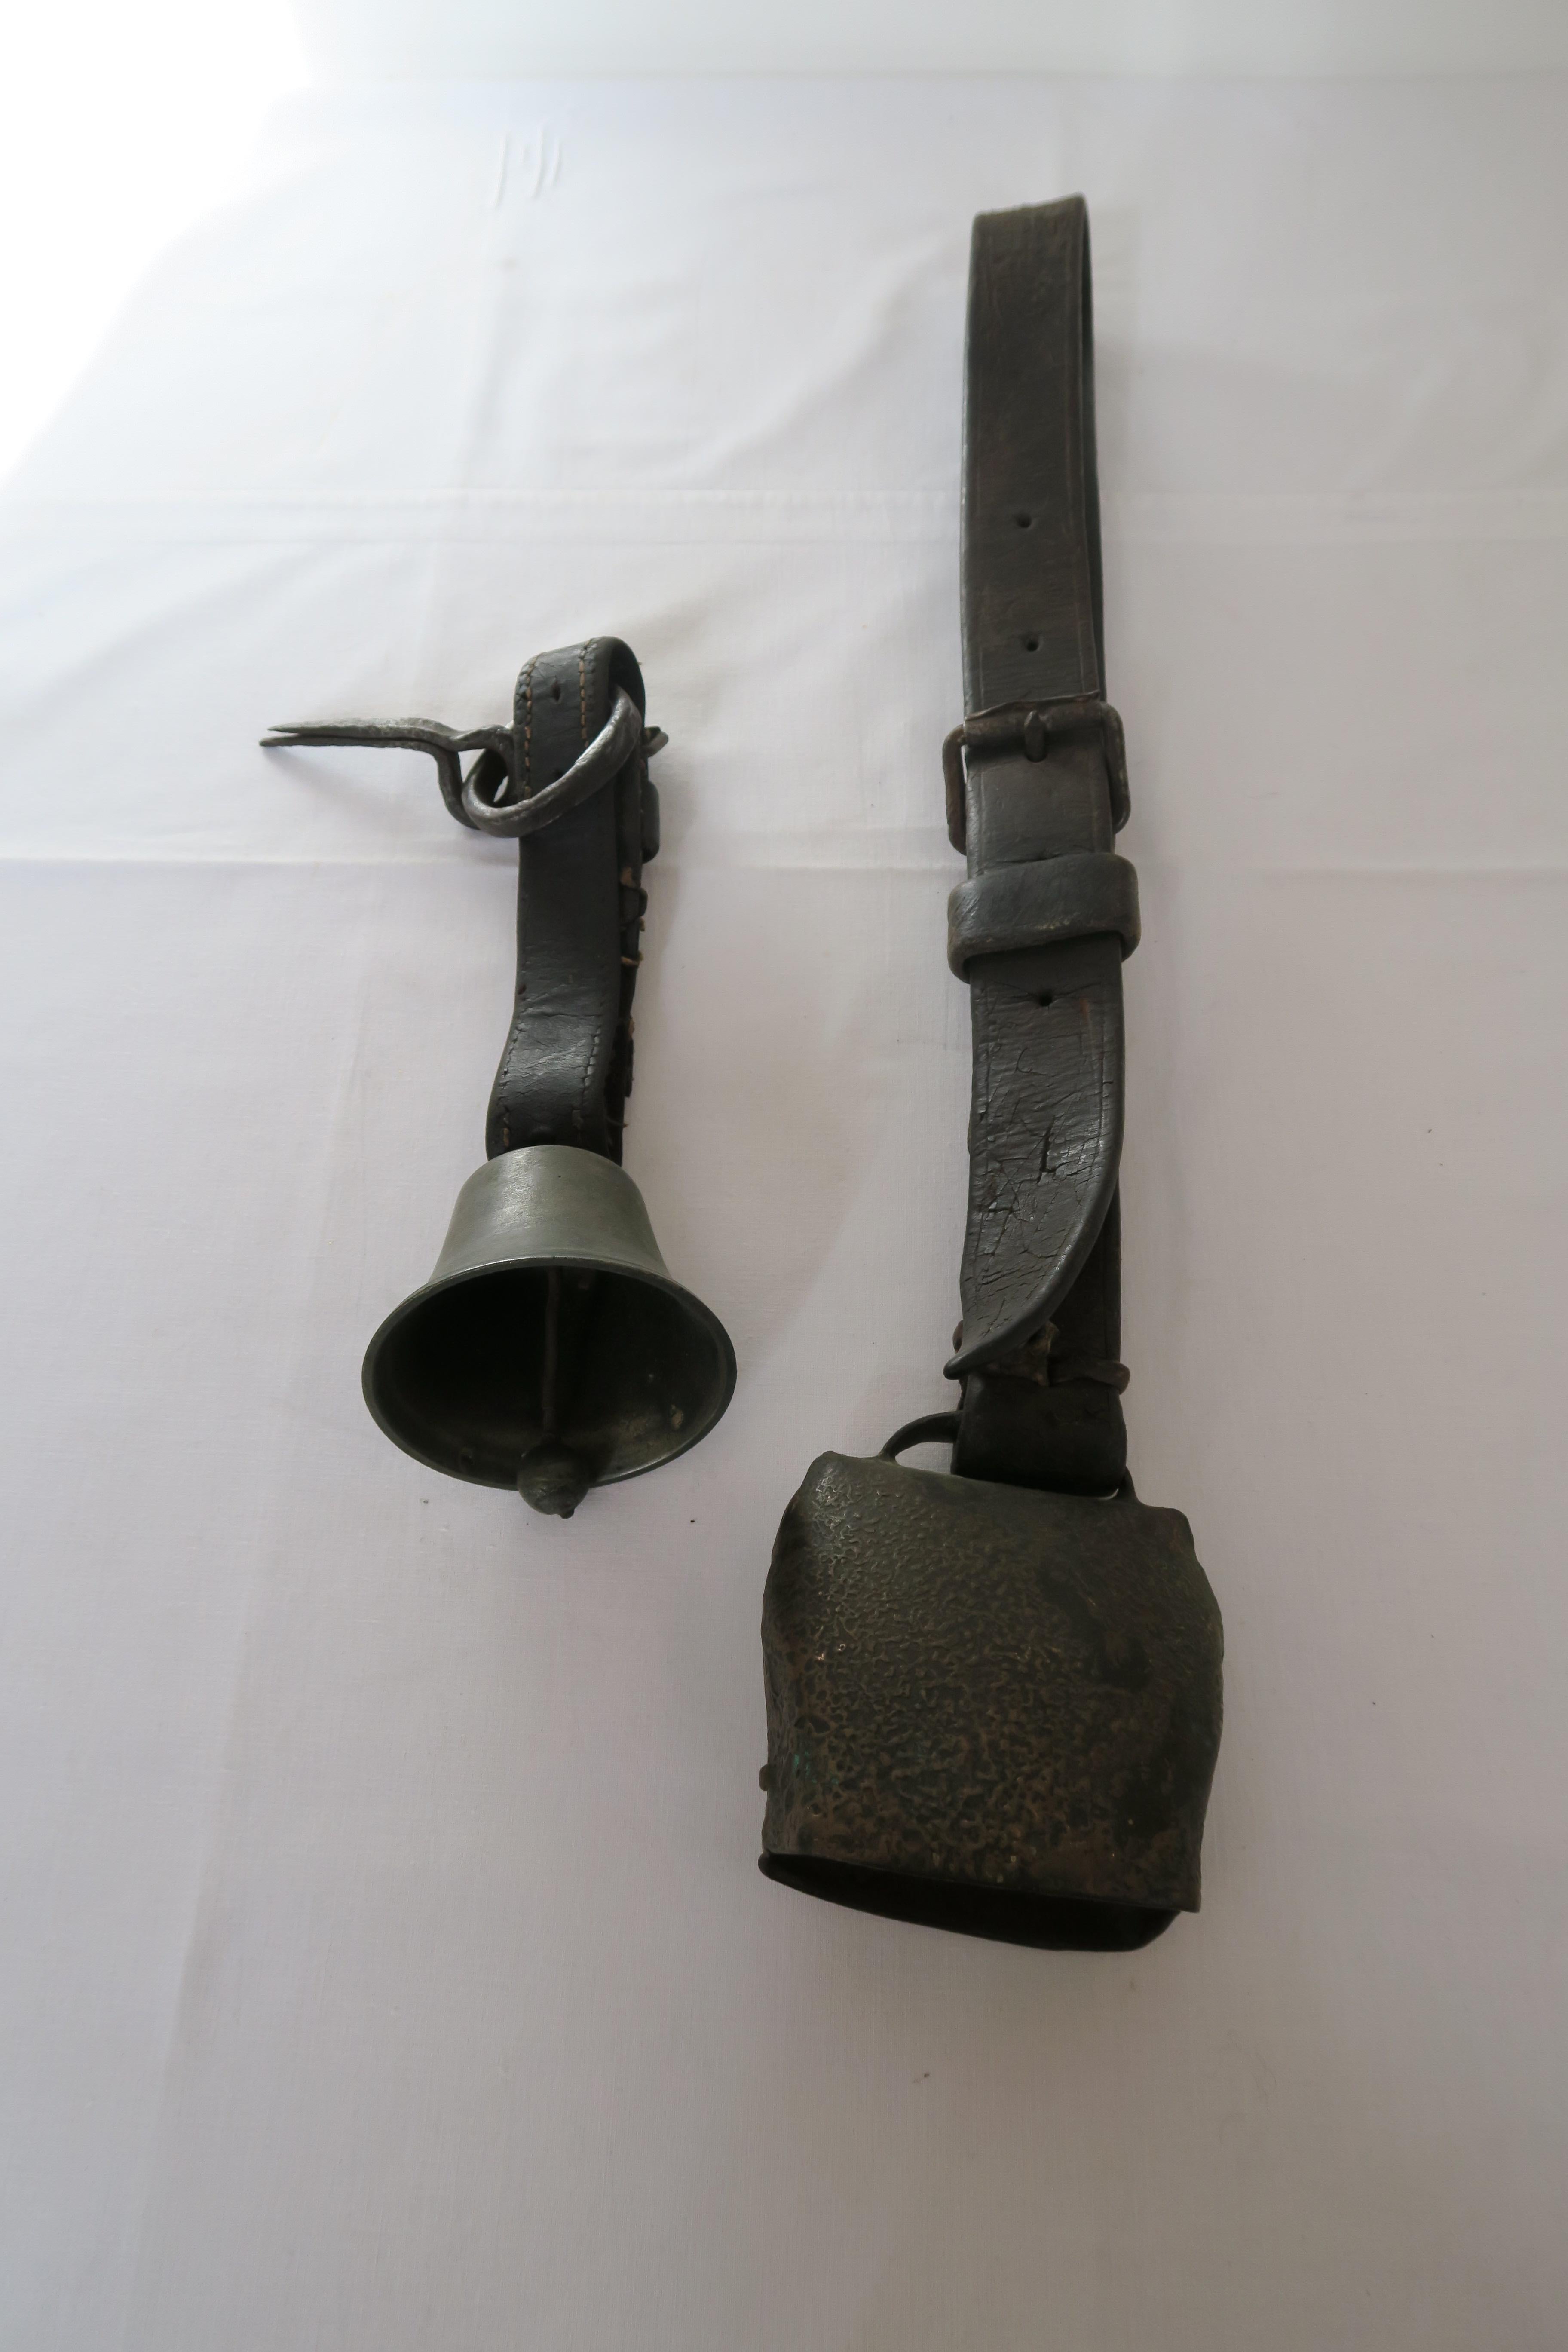 For sale is a beautiful and unique set of to Austrian mountain pasture bells- one of them a cow bell, the other a sheep bell. They were most likely made and in use in the early 1900s. Visible in the pictures is the magnificent patina, that developed